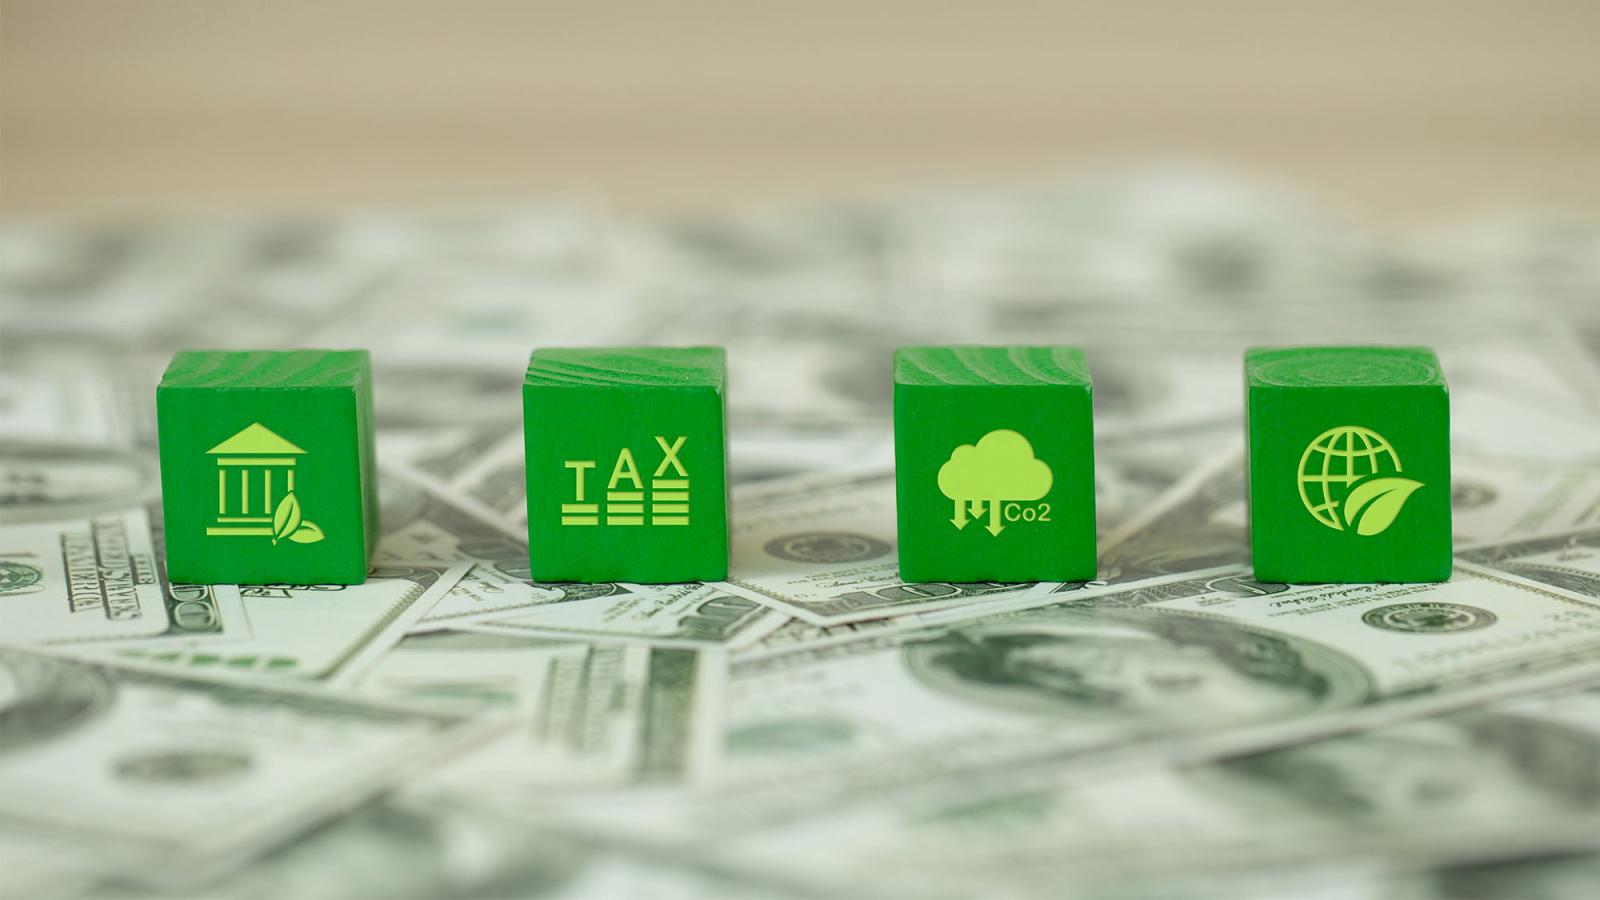 Four green cubes with tax symbols printed on each one.